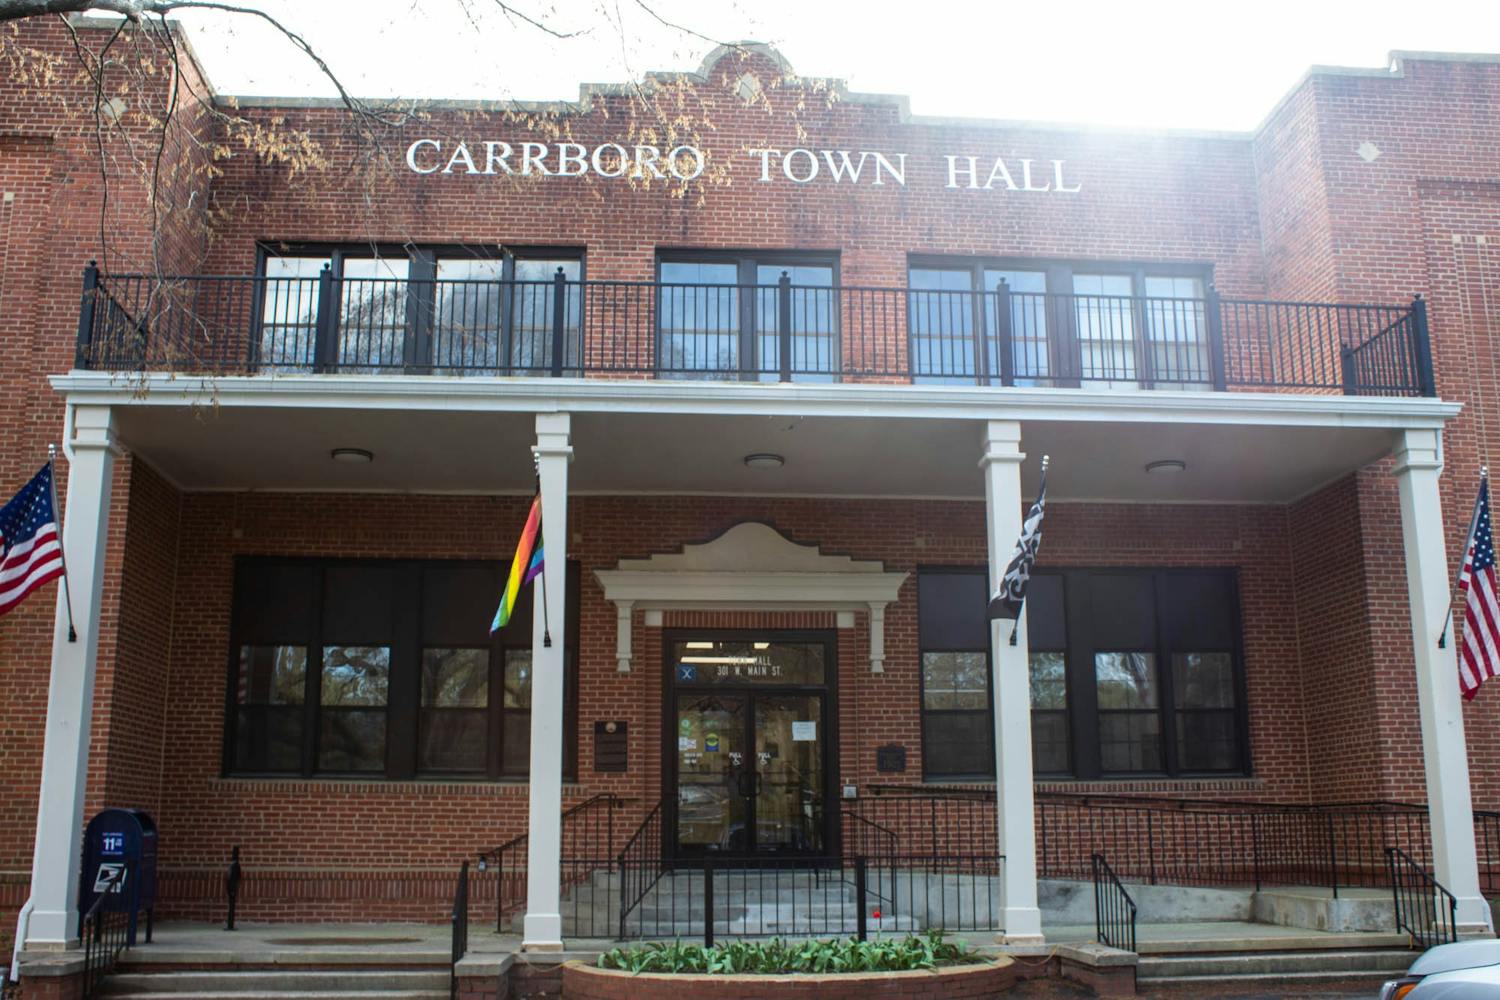 20230327_Garcia_city-carrboro-assistant-town-manager-feature-3.jpg